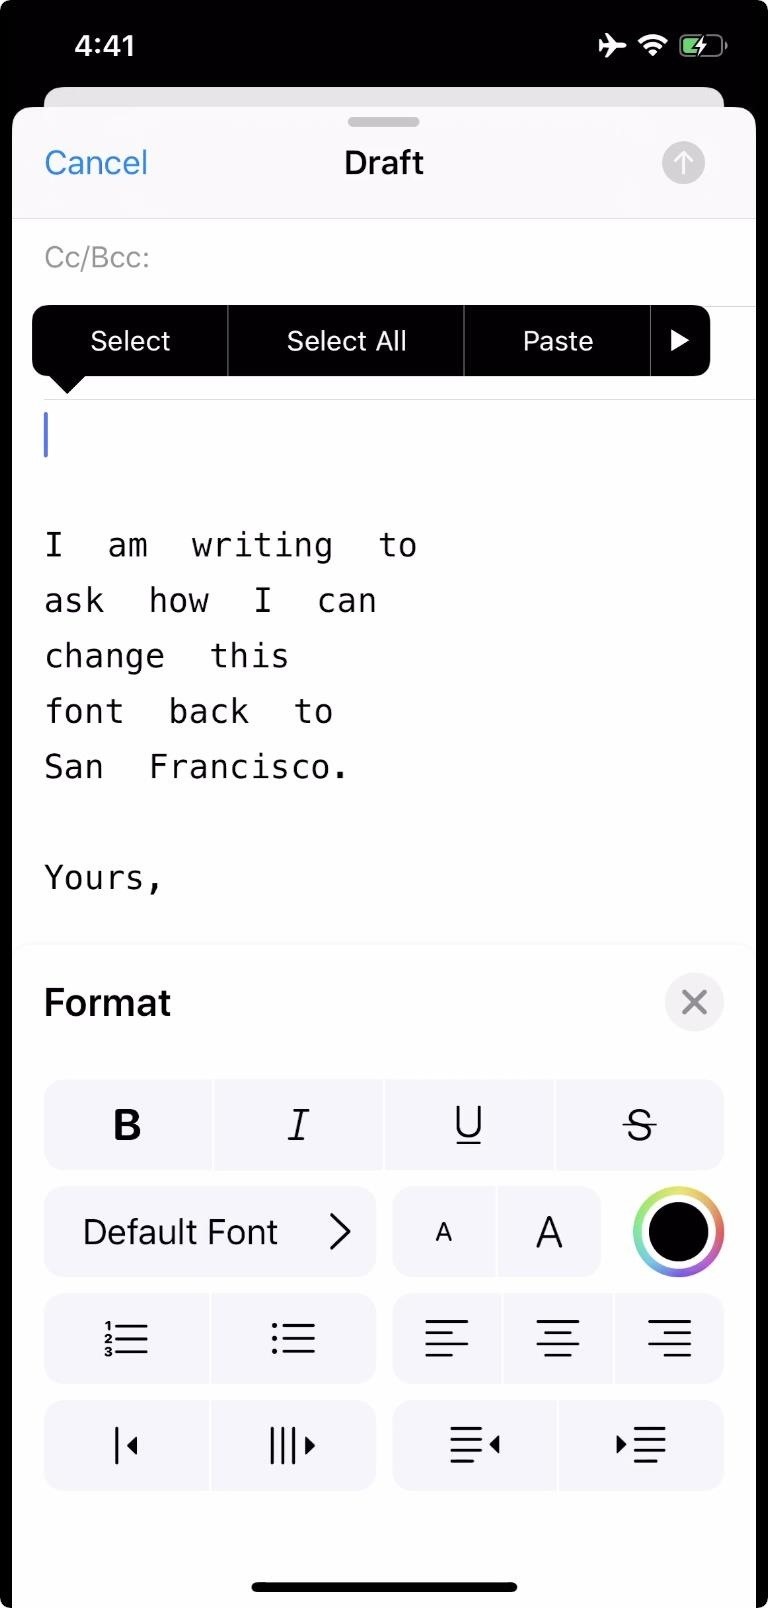 How to Return to the Default Font in Mail Drafts After Using a Custom One